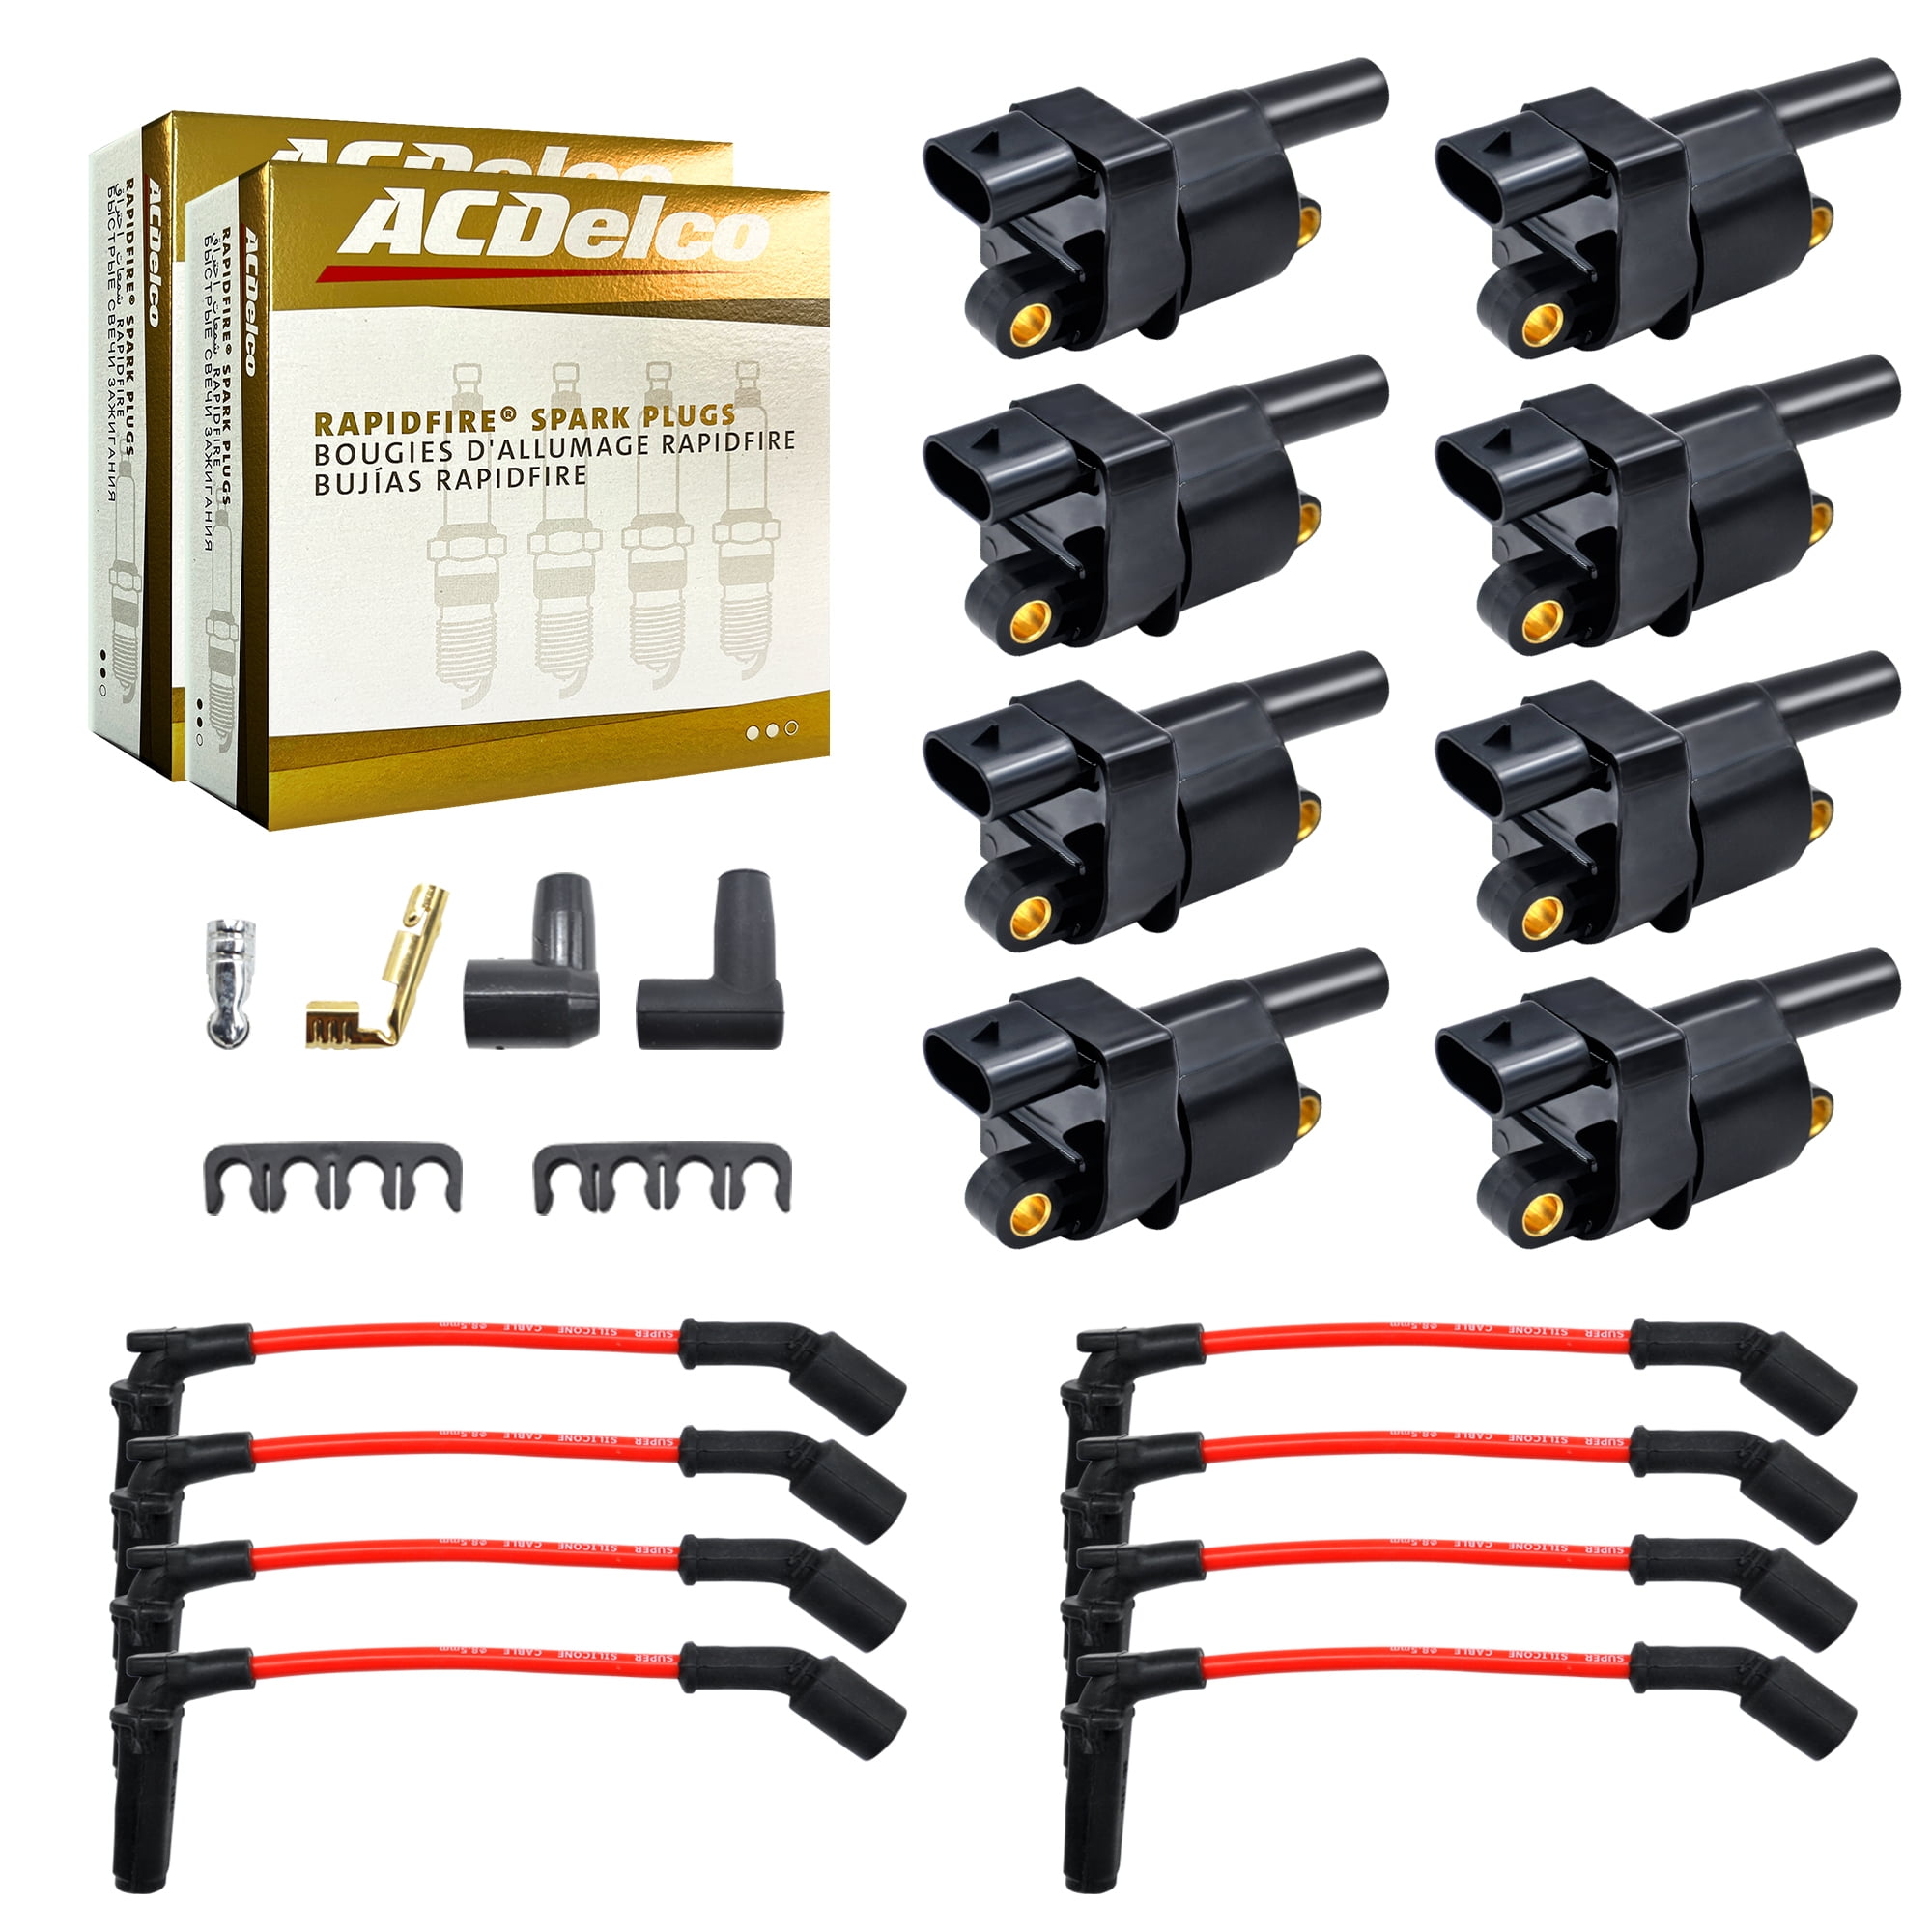 8 Pcs of UF414 Ignition Coil Packs & ACDelco Spark Plug & Spark